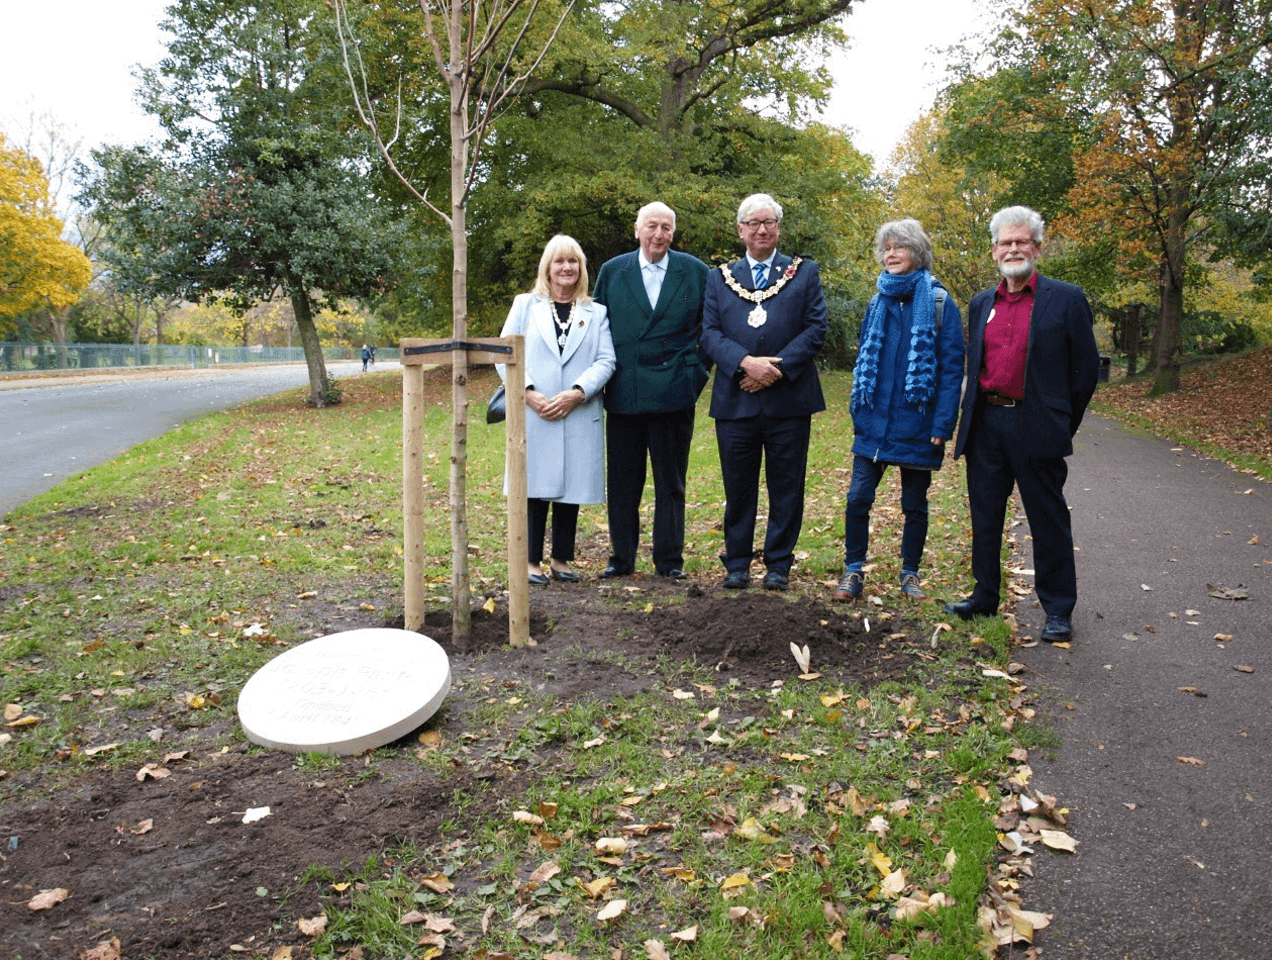 Mayoress of Wirral, the Duke of Devonshire, Mayor of Wirral, and Presidents of Friends of Princes Park and Friends of Birkenhead Park